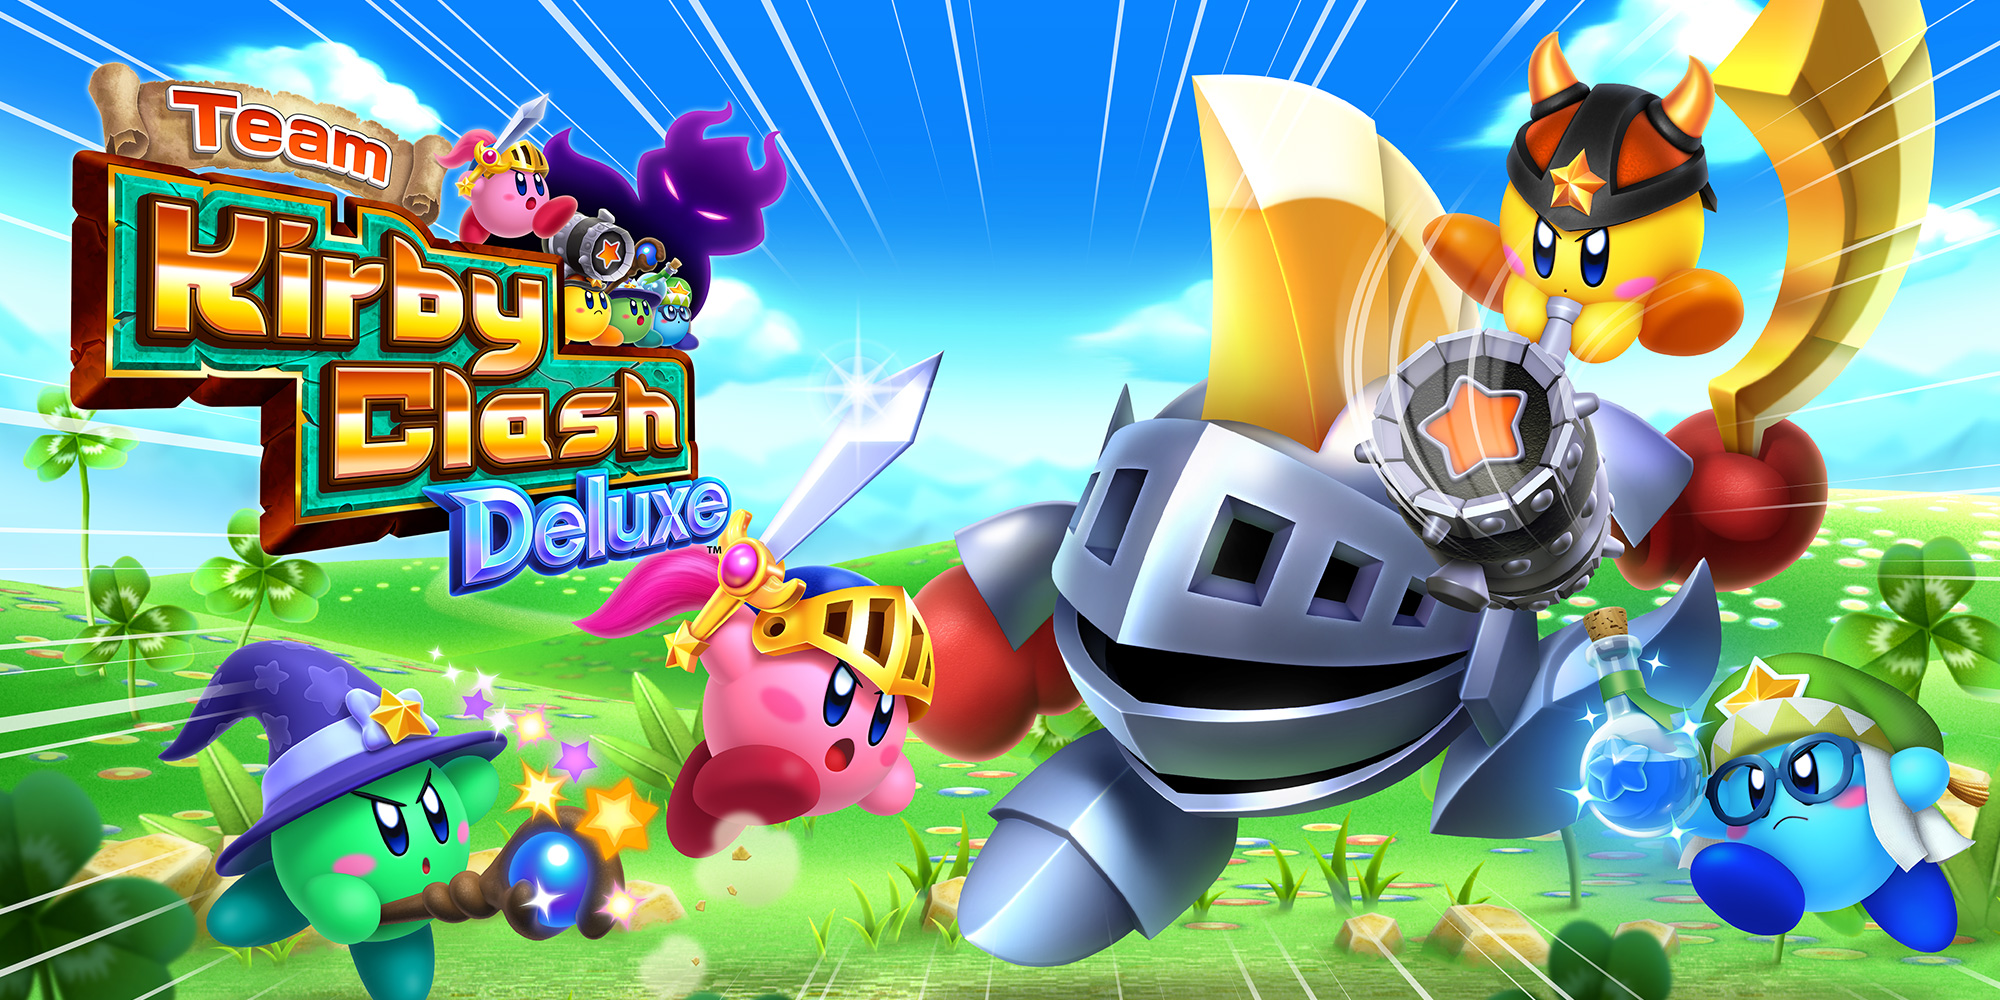 Team Kirby Clash Deluxe. Nintendo 3DS download software